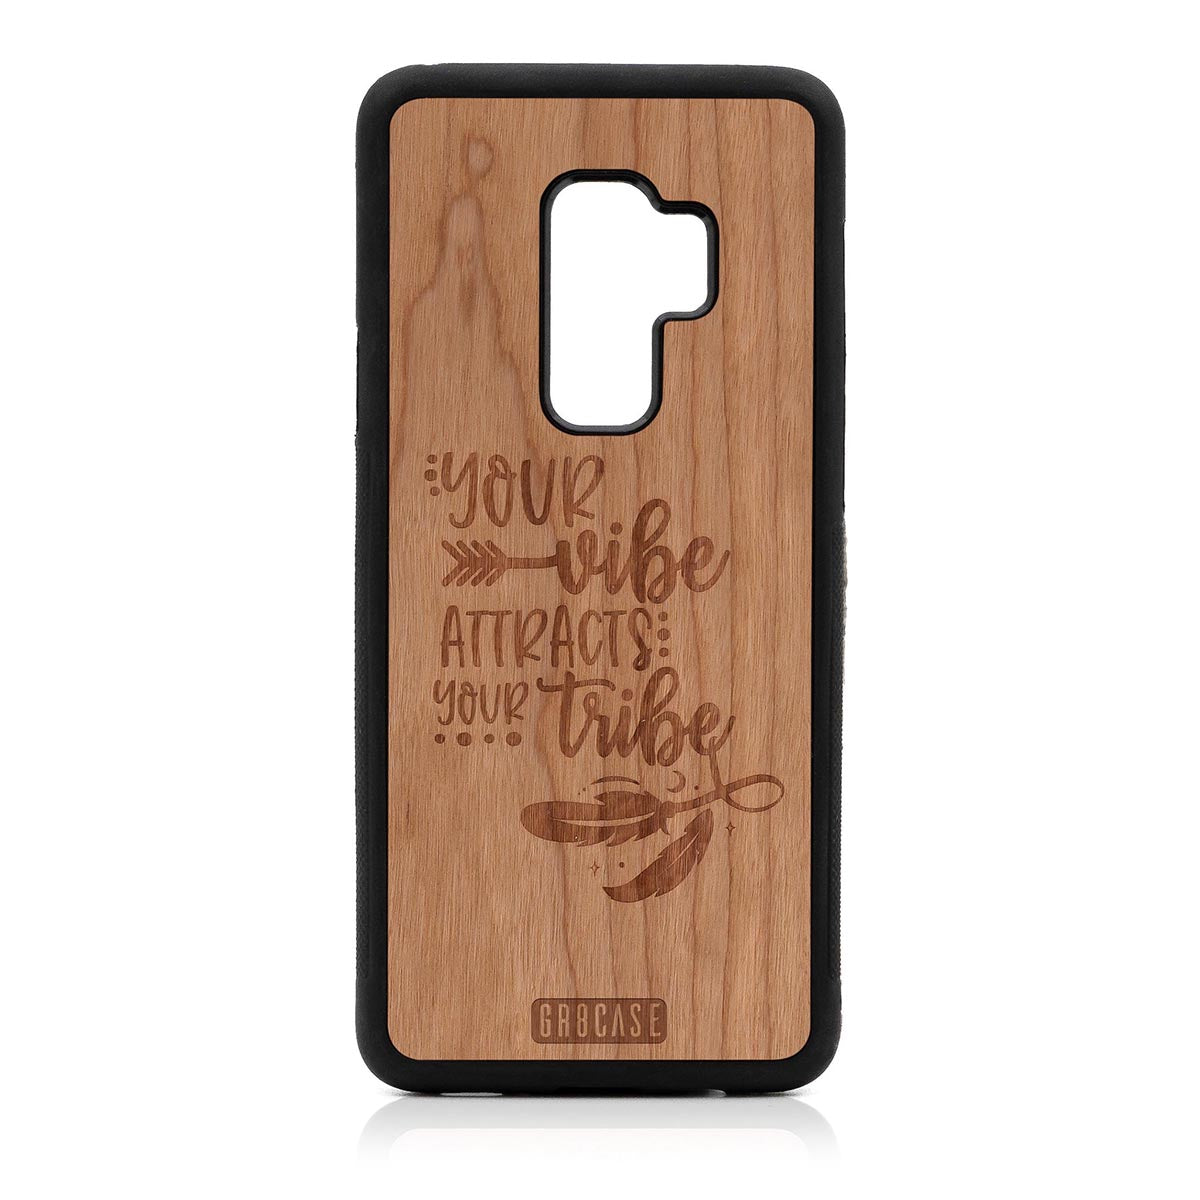 Your Vibe Attracts Your Tribe Design Wood Case Samsung Galaxy S9 Plus